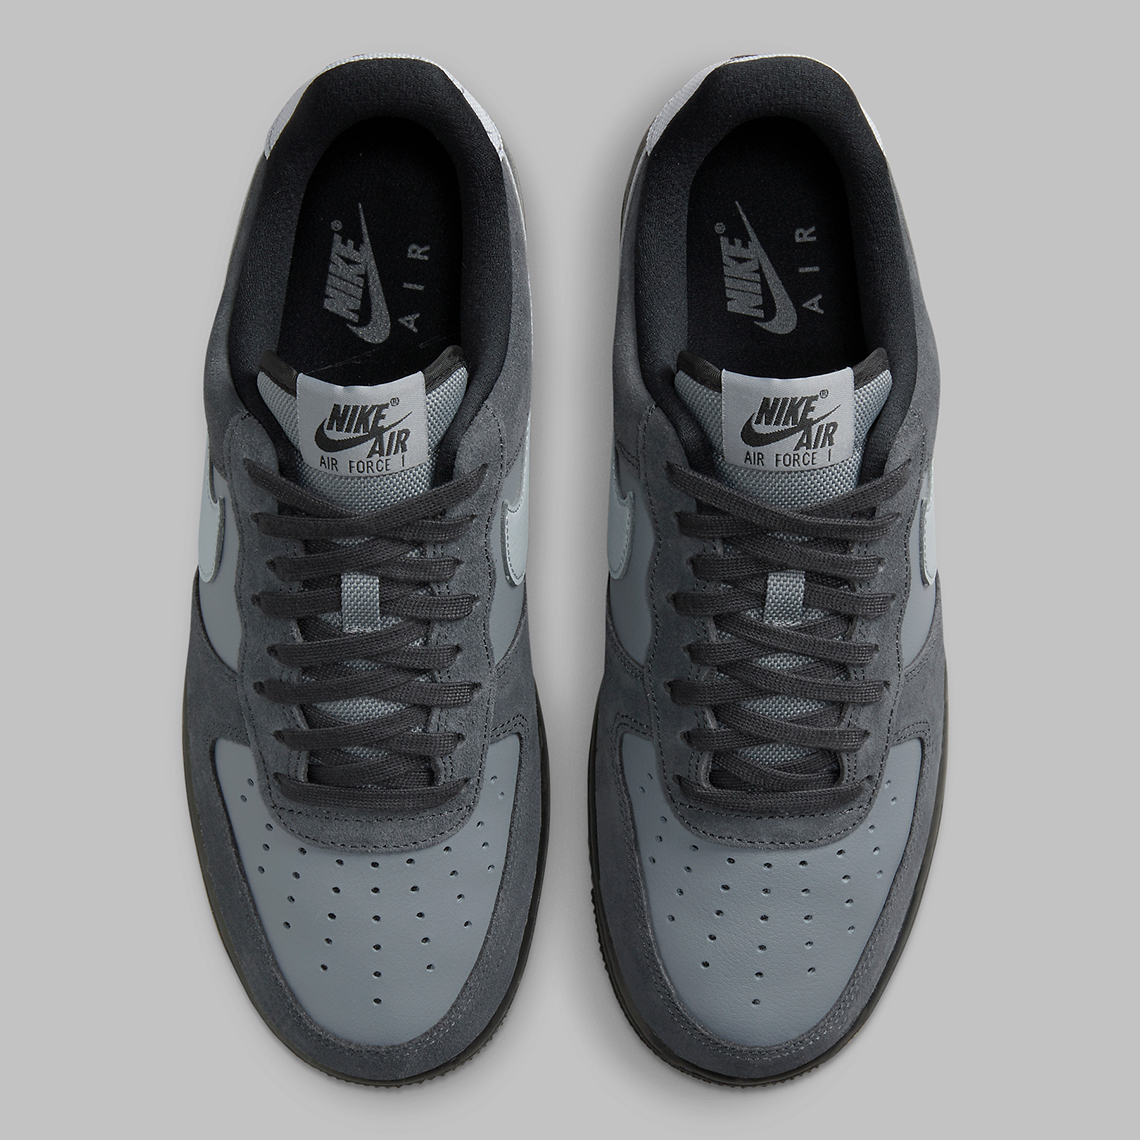 Nike Air Force 1 Low Wolf Grey Anthracite Cw7584 001 8